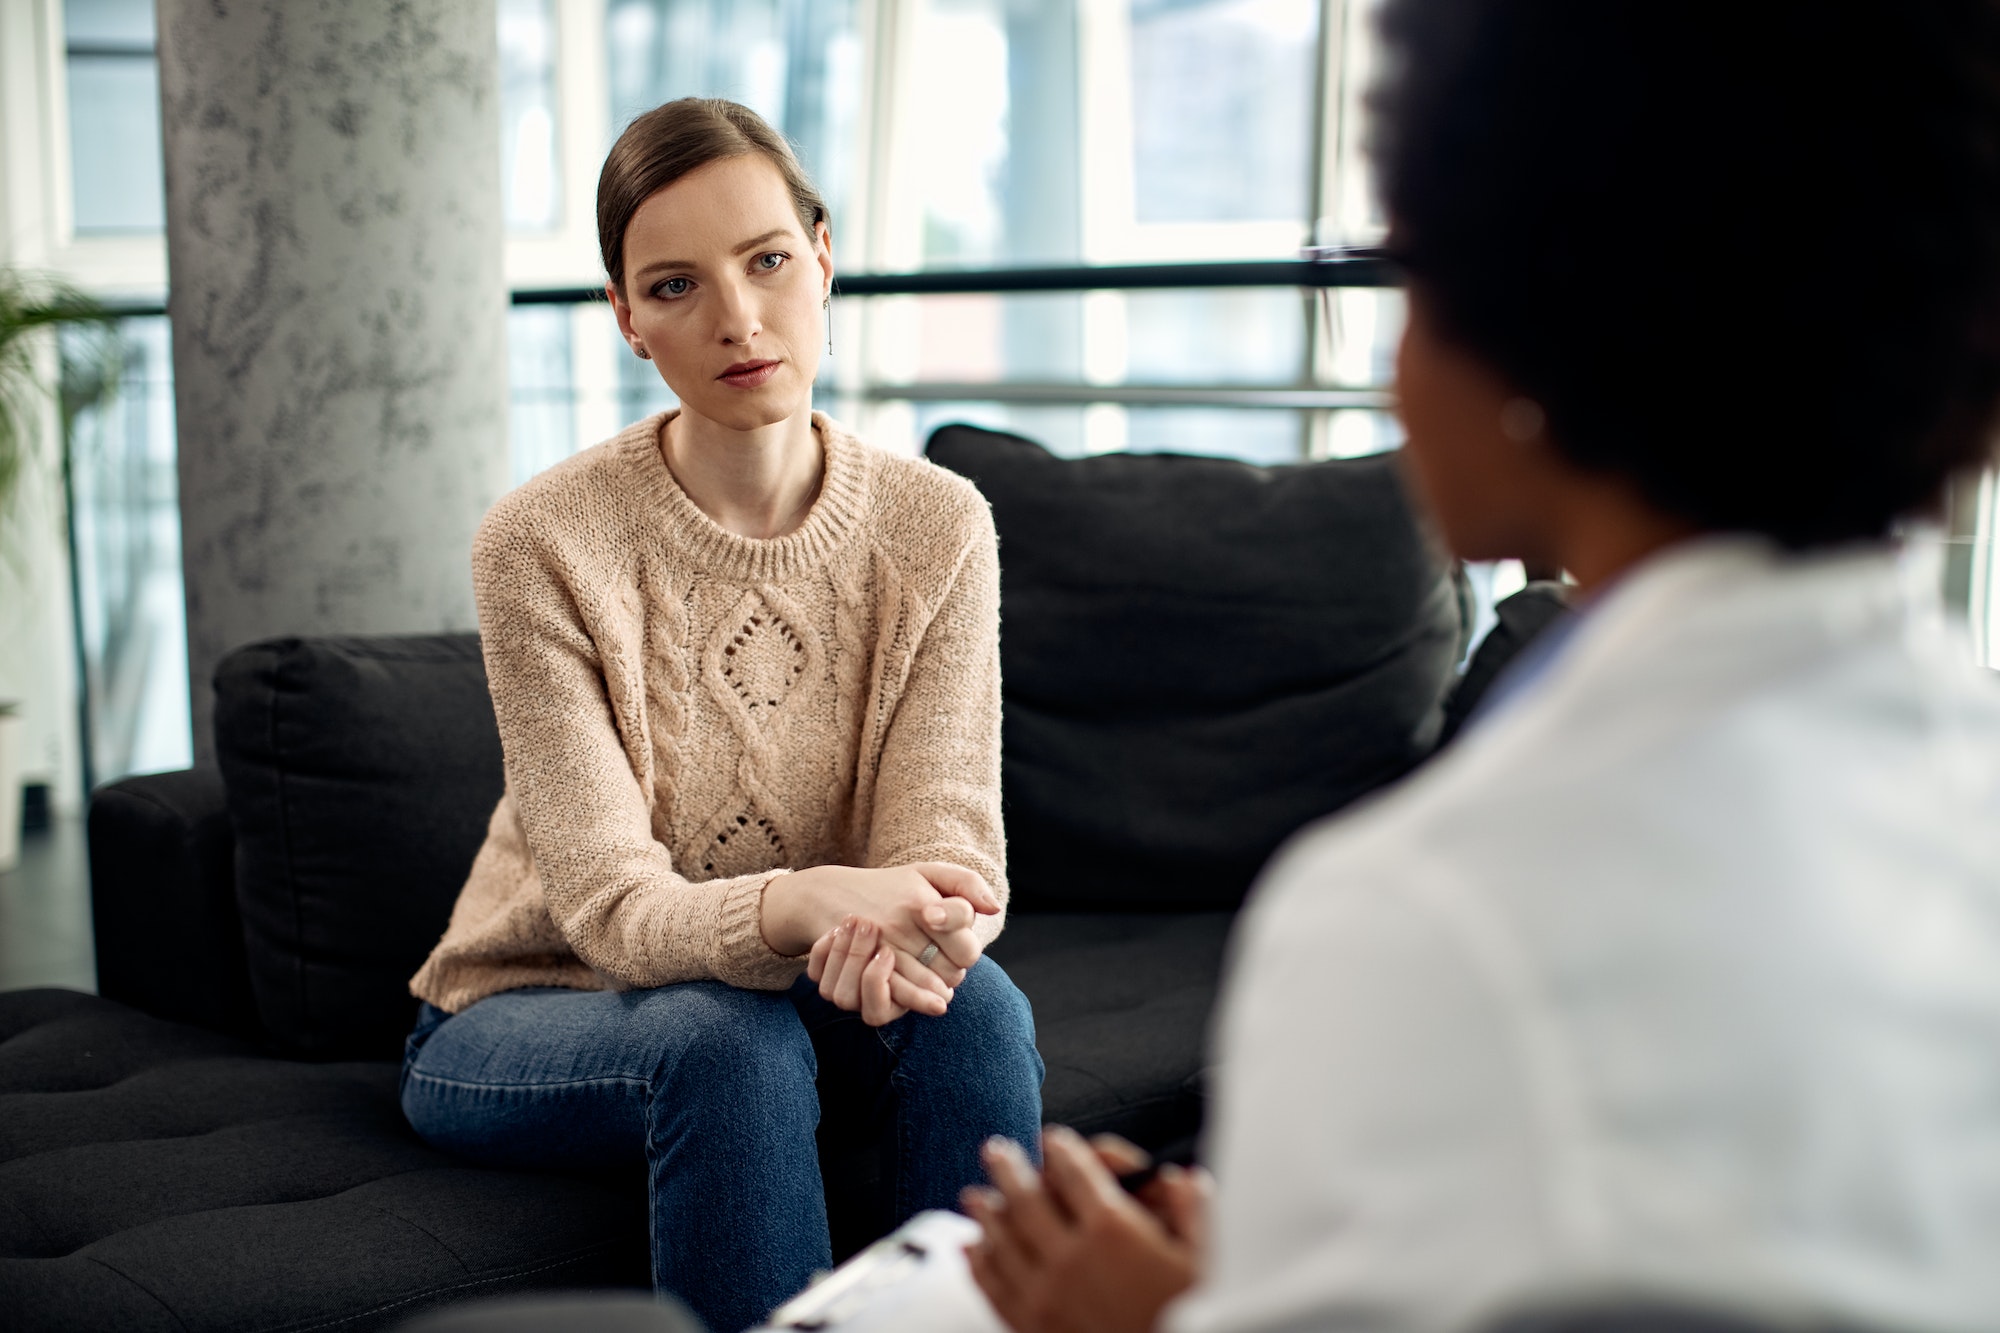 Young woman having counseling with psychotherapist at doctor's office.